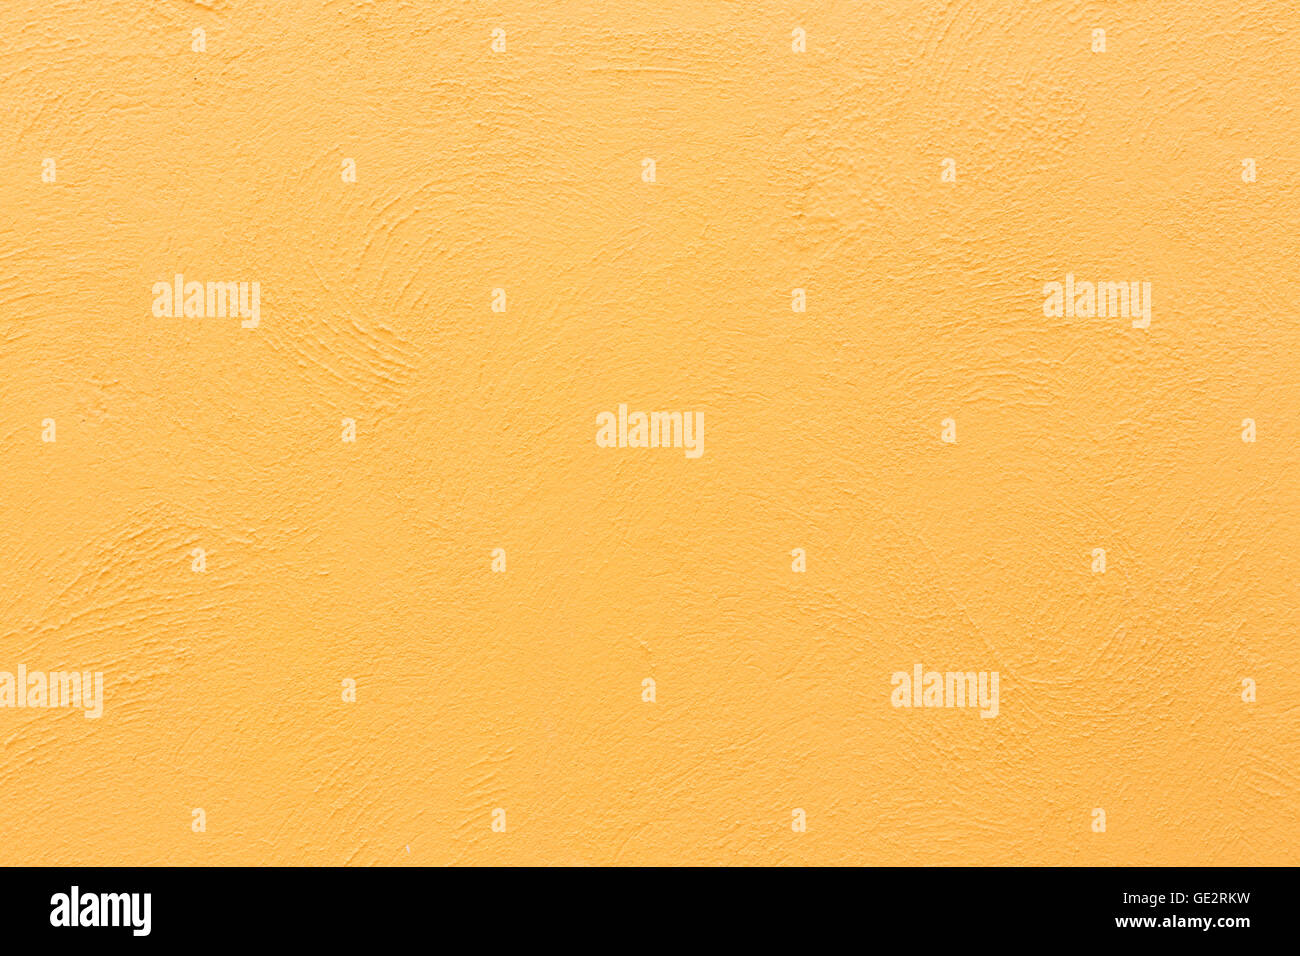 abstract gold background yellow color, light corner spotlight, faint orange vintage grunge background texture gold yellow paper Stock Photo